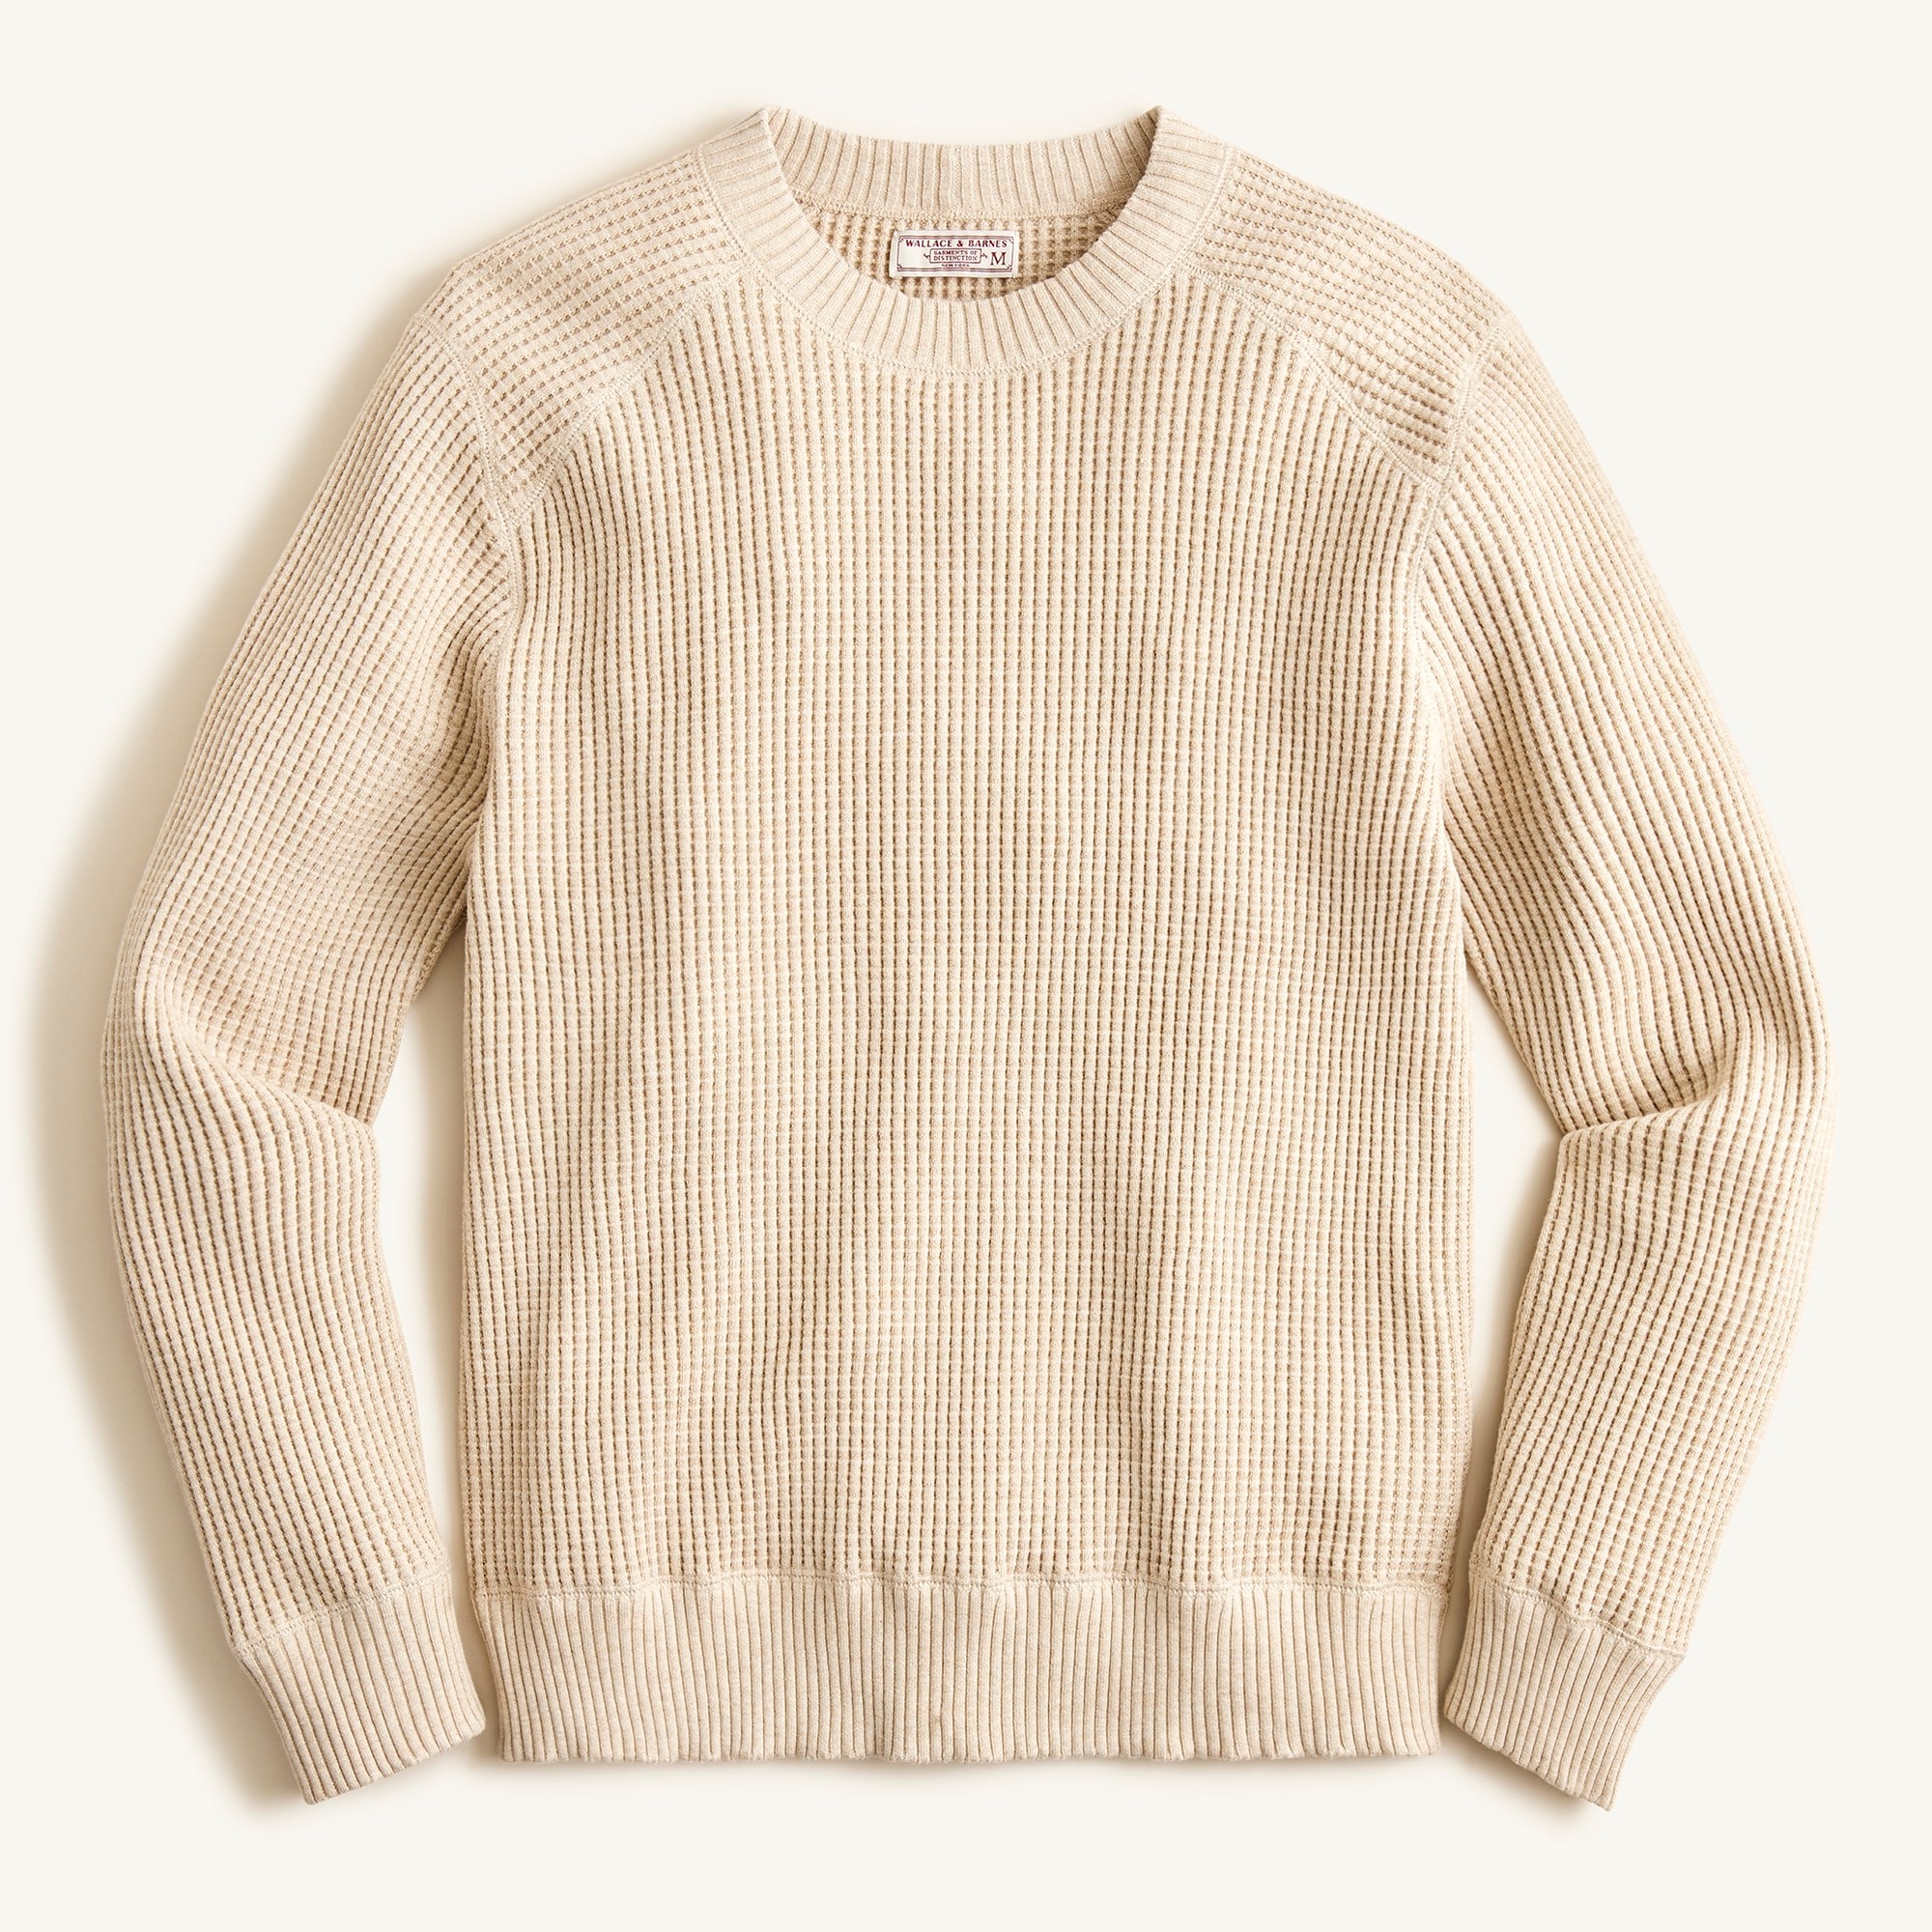 J.Crew: Wallace & Barnes Cotton Waffle Sweater For Men